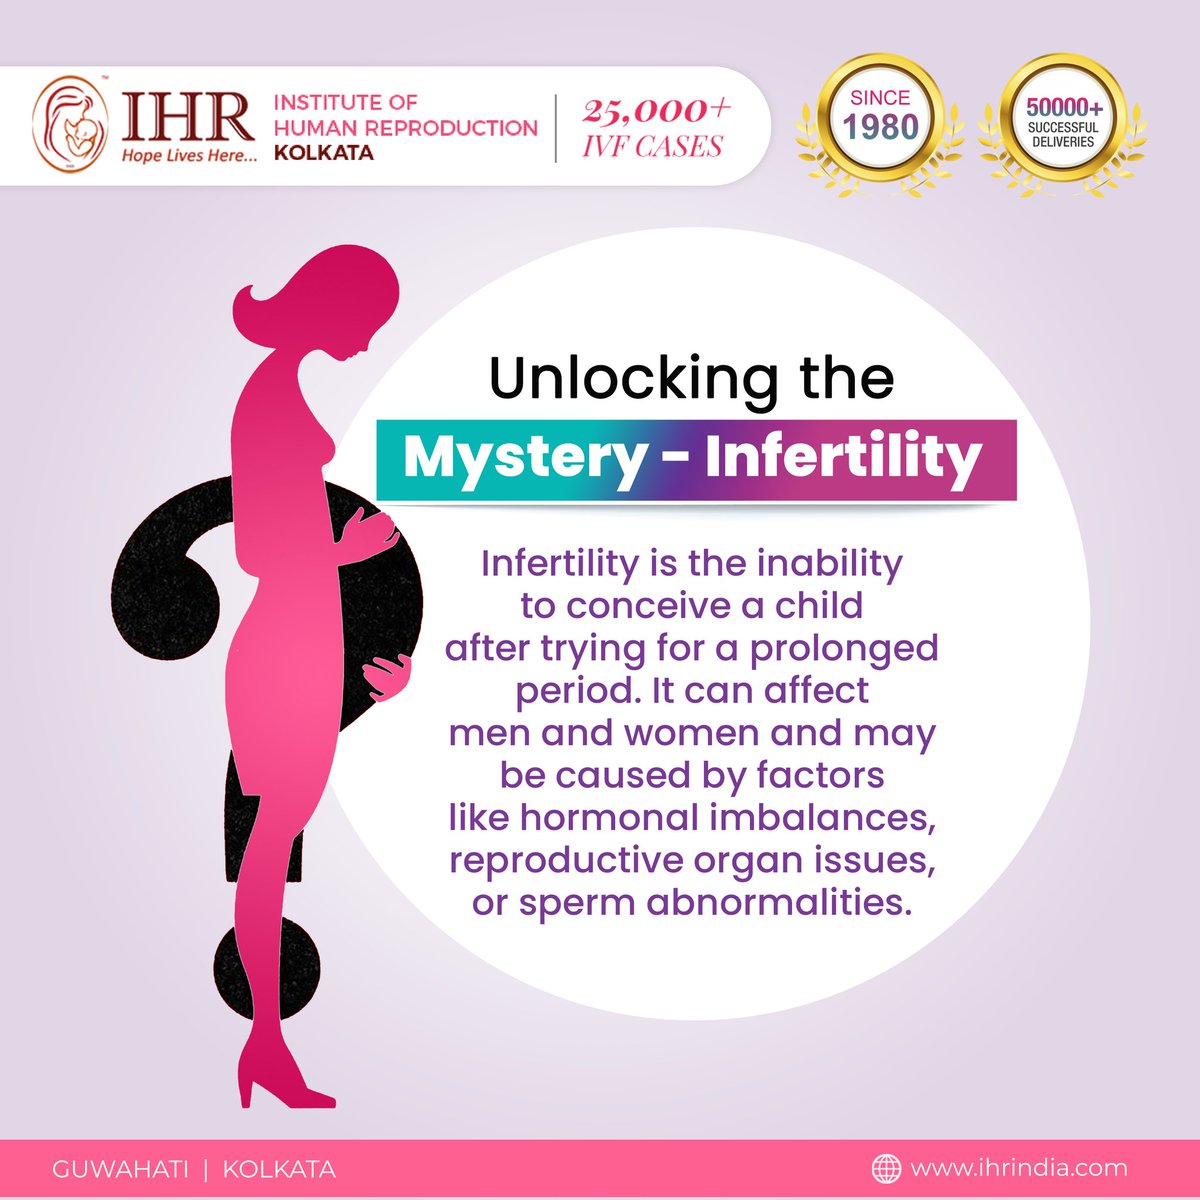 Infertility is a common and significant challenge faced by countless couples across the globe. It can happen to both men and women.

To know more, visit ihrindia.com/kolkata/

#IHR #Ivf #ivfcentre #fertility #ivfhospital #family #ivfsuccess #ihrkolkata #ivfkolkata #parents